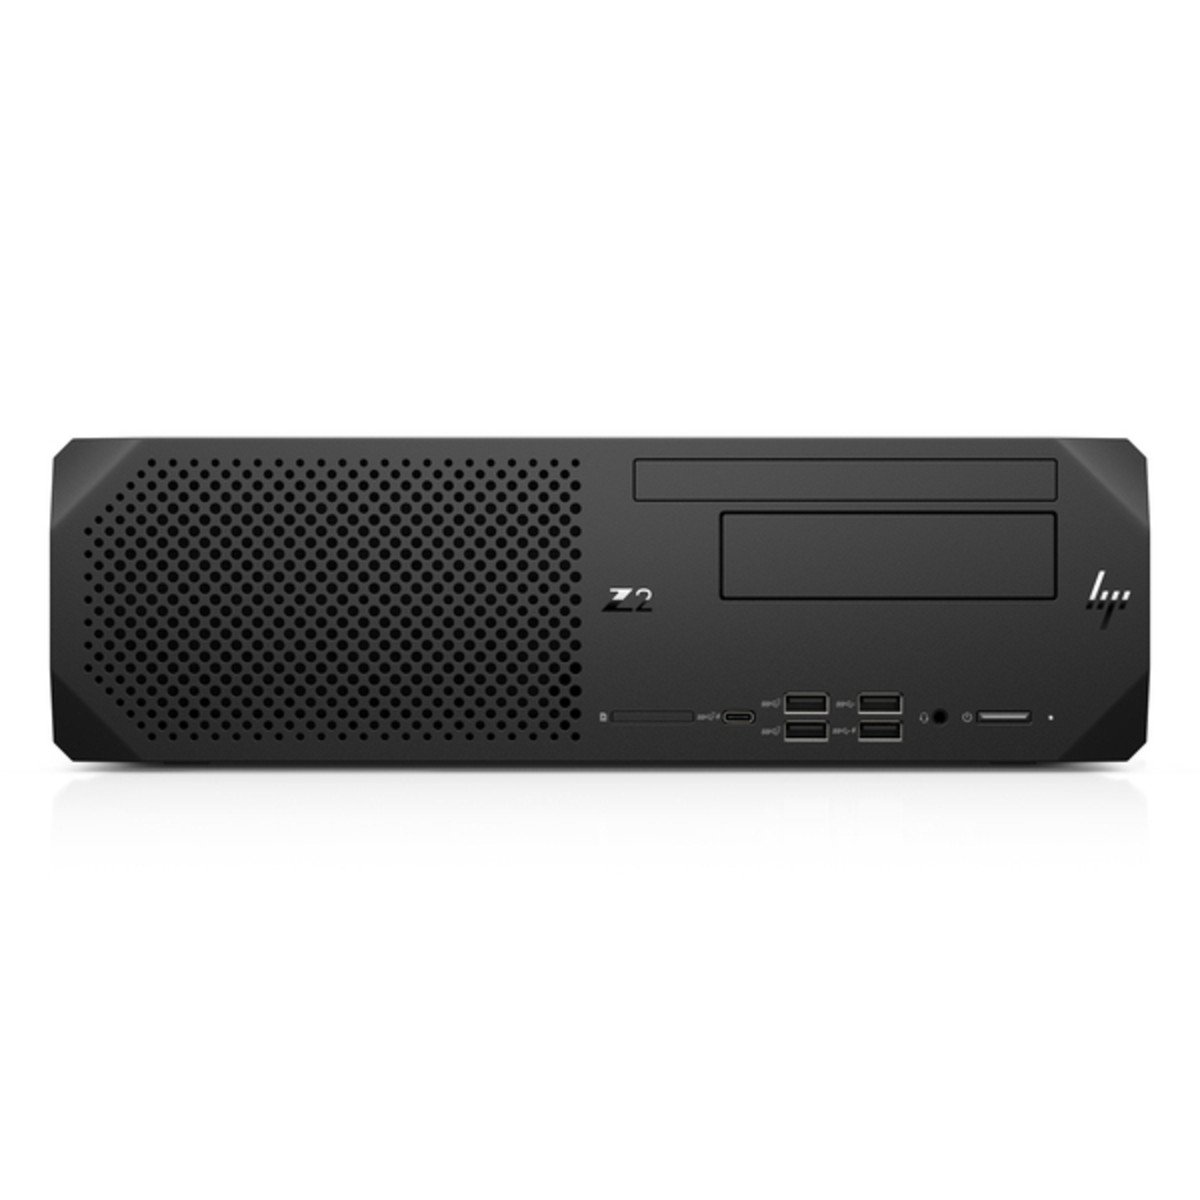 HP Z2 G8 Workstation Intel i5-11500 4.6GHz 16GB RAM 256GB SSD Small Form Factor Computer with Windows 10 Pro